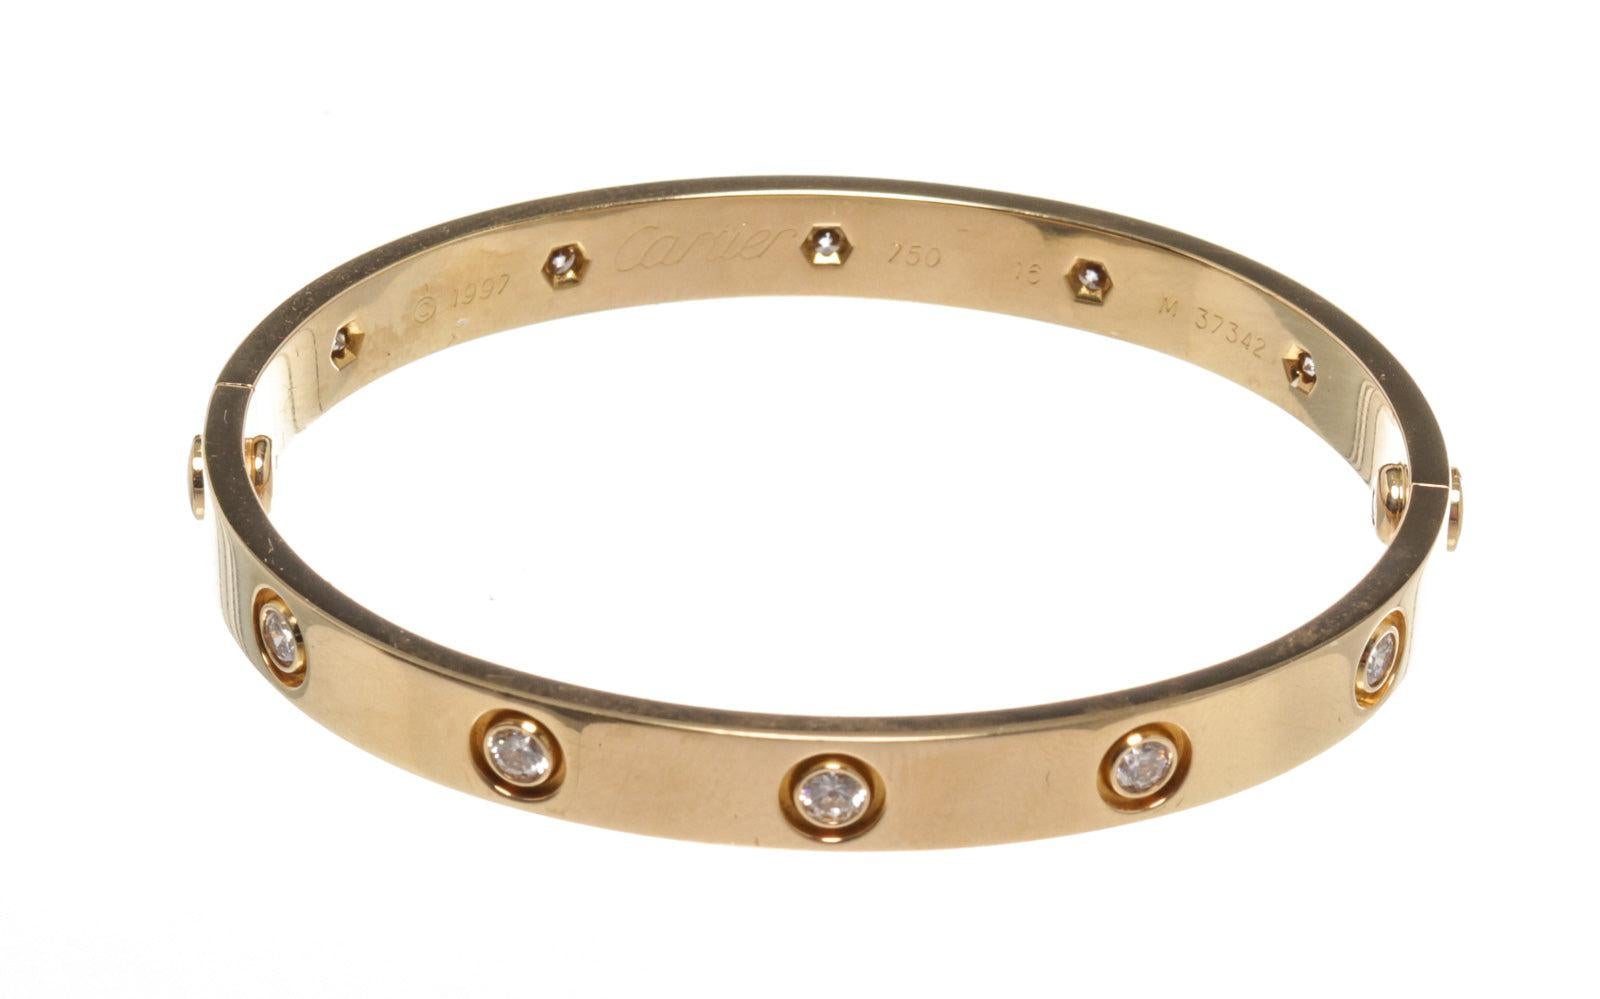 Cartier Gold Diamond Love 16 Bracelet with gold-tone hardware. Dated in 1997 having the older screws. Comes with the screw but no box.

M37342


52778MSC